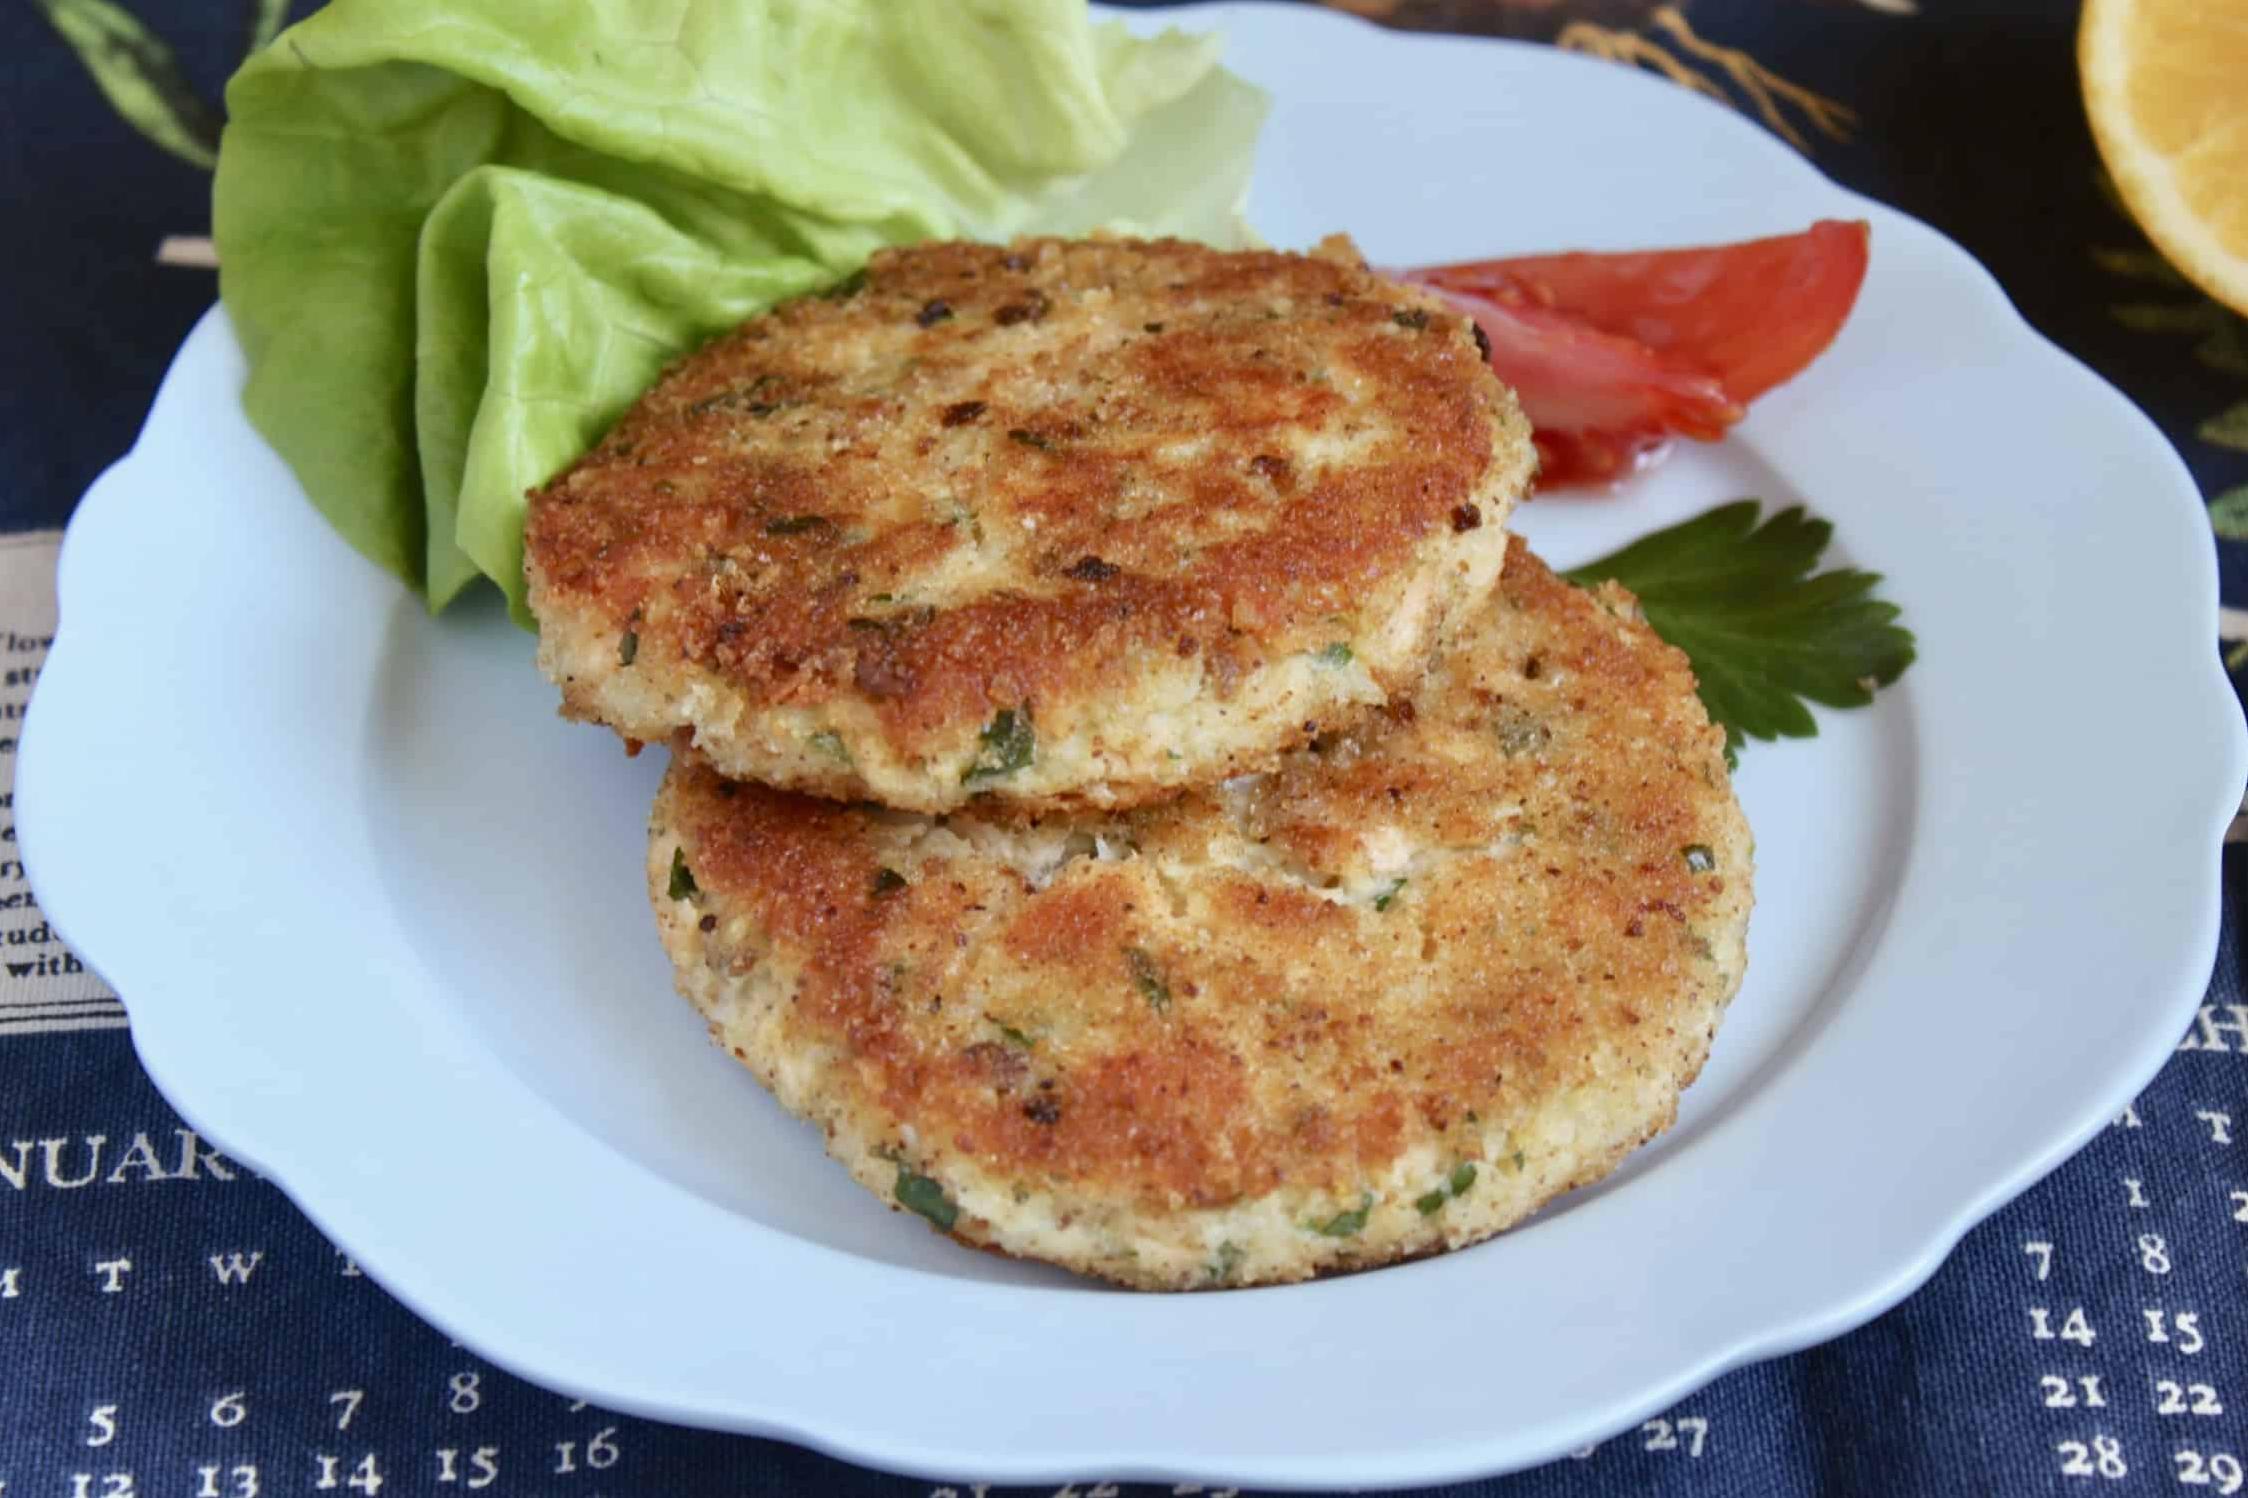  Have a taste of Ireland with these flavorful salmon cakes.